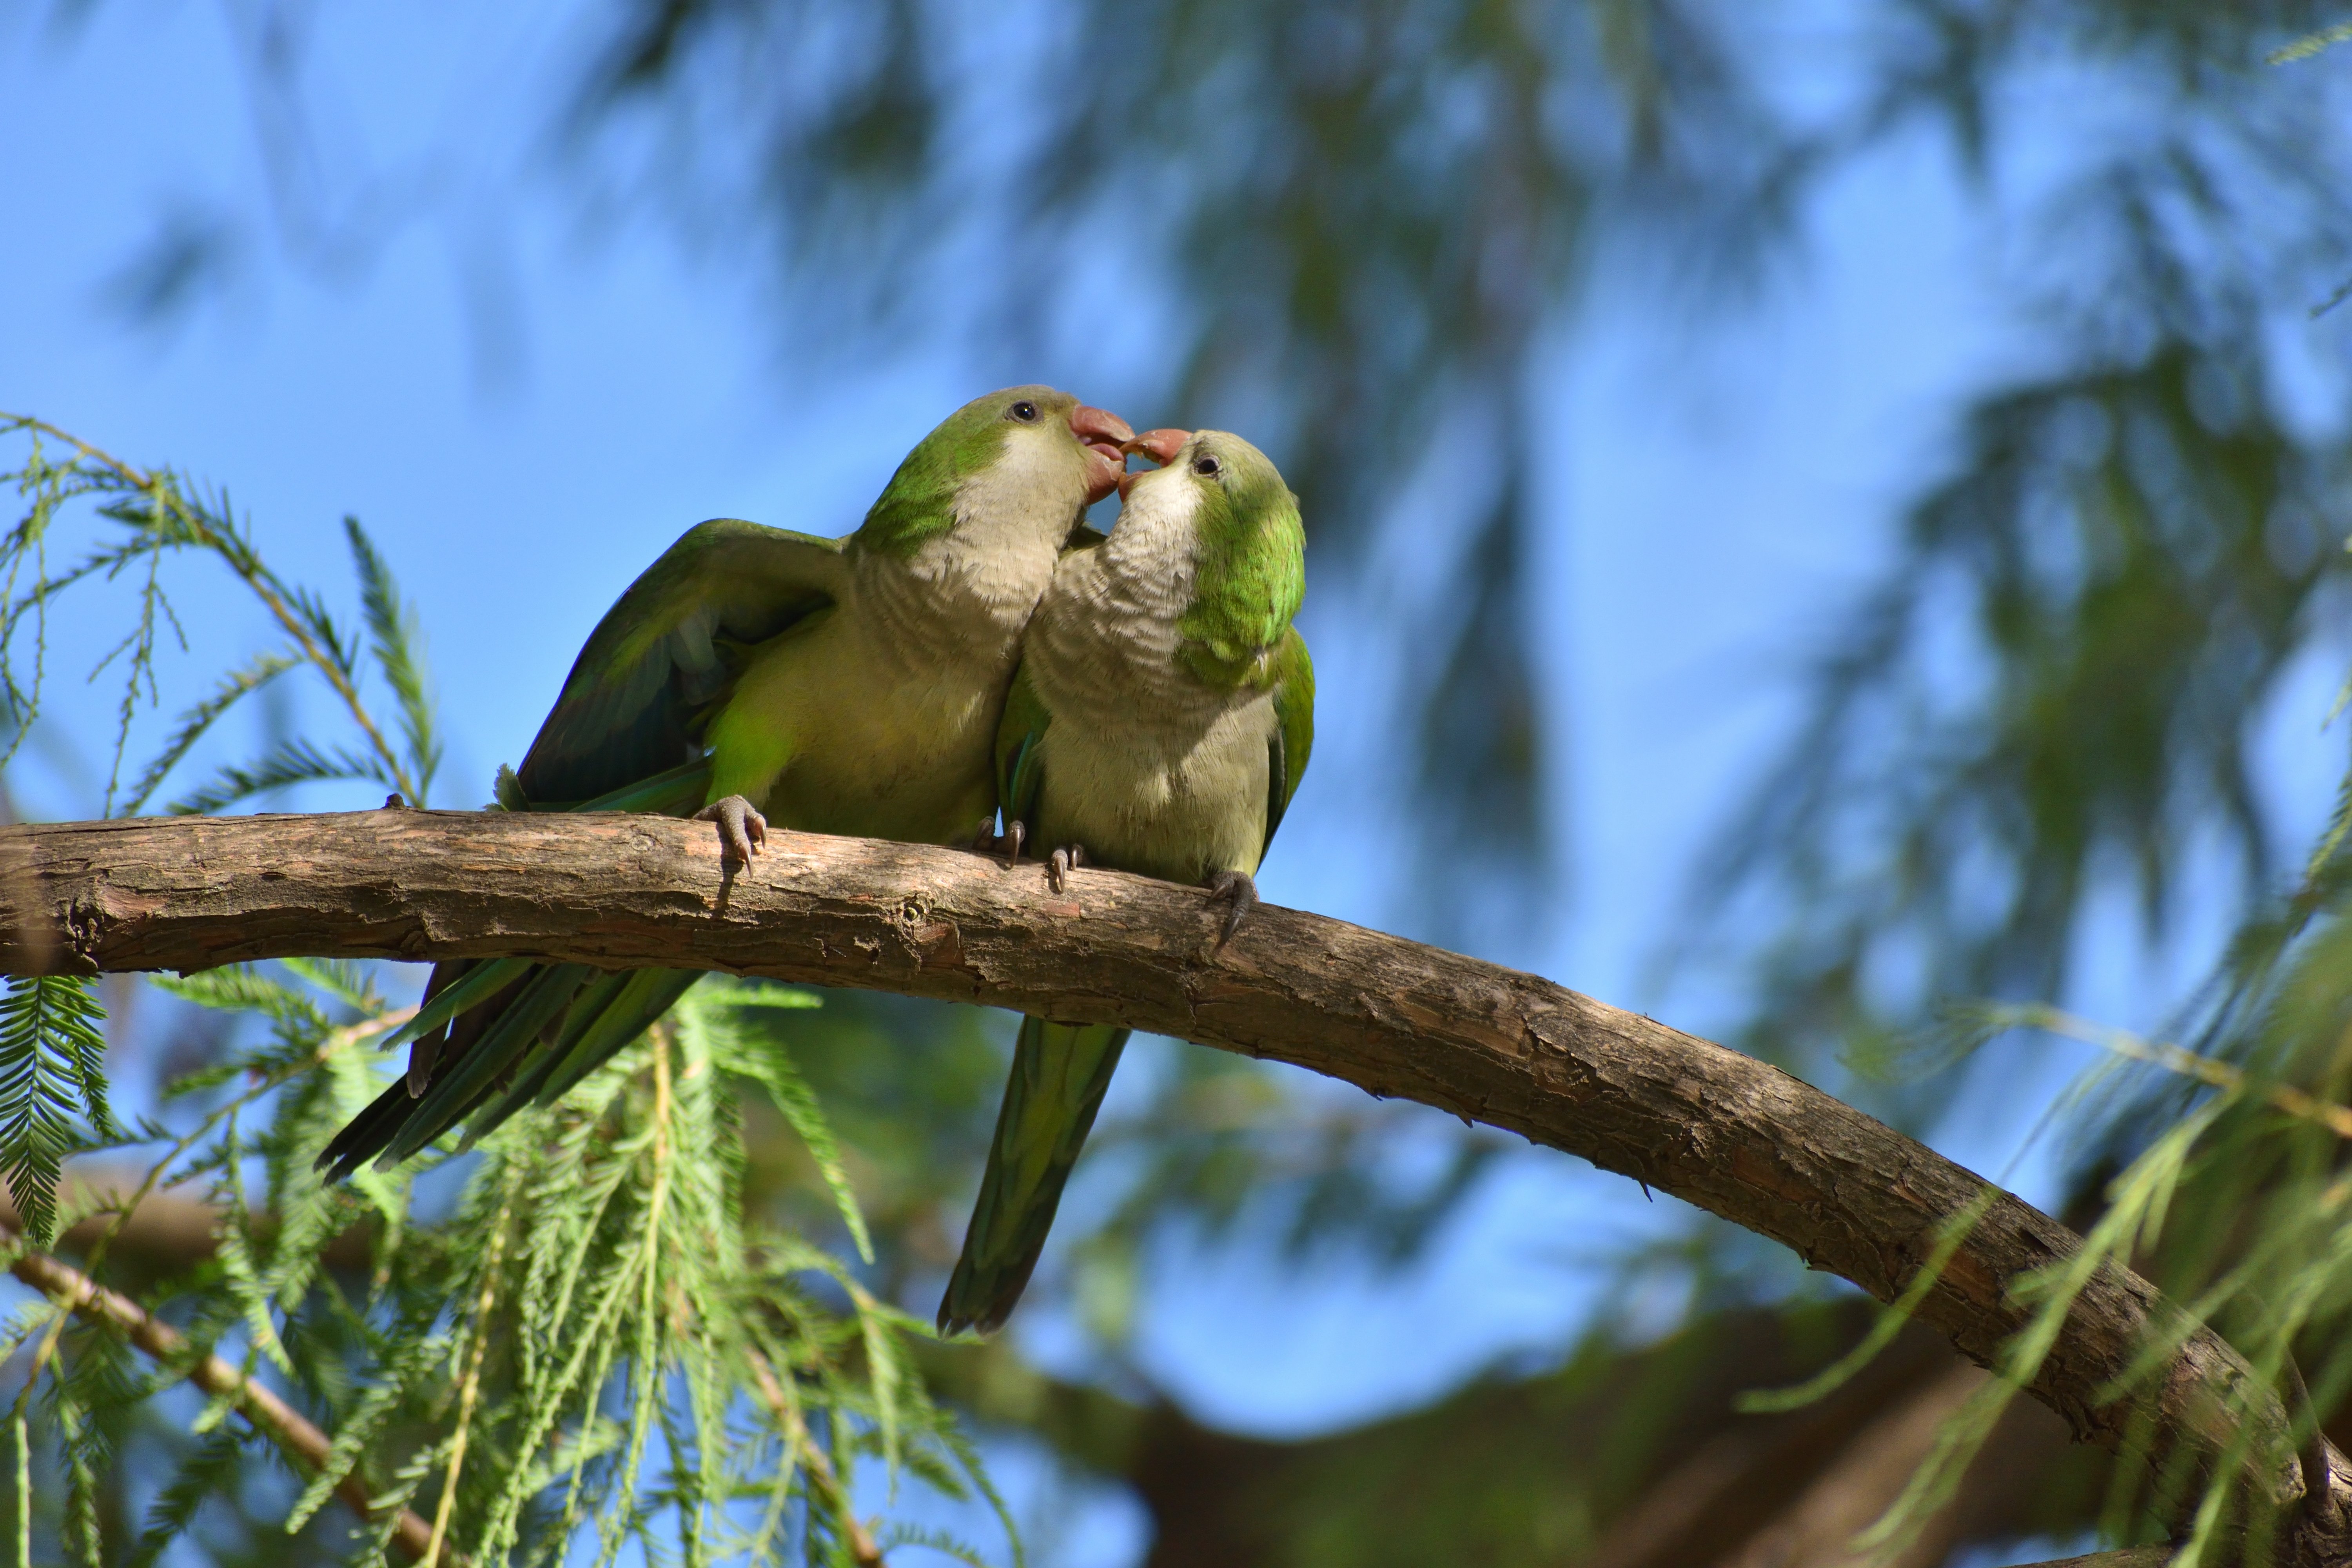 Two quaker parakeets on a branch nuzzling each other.